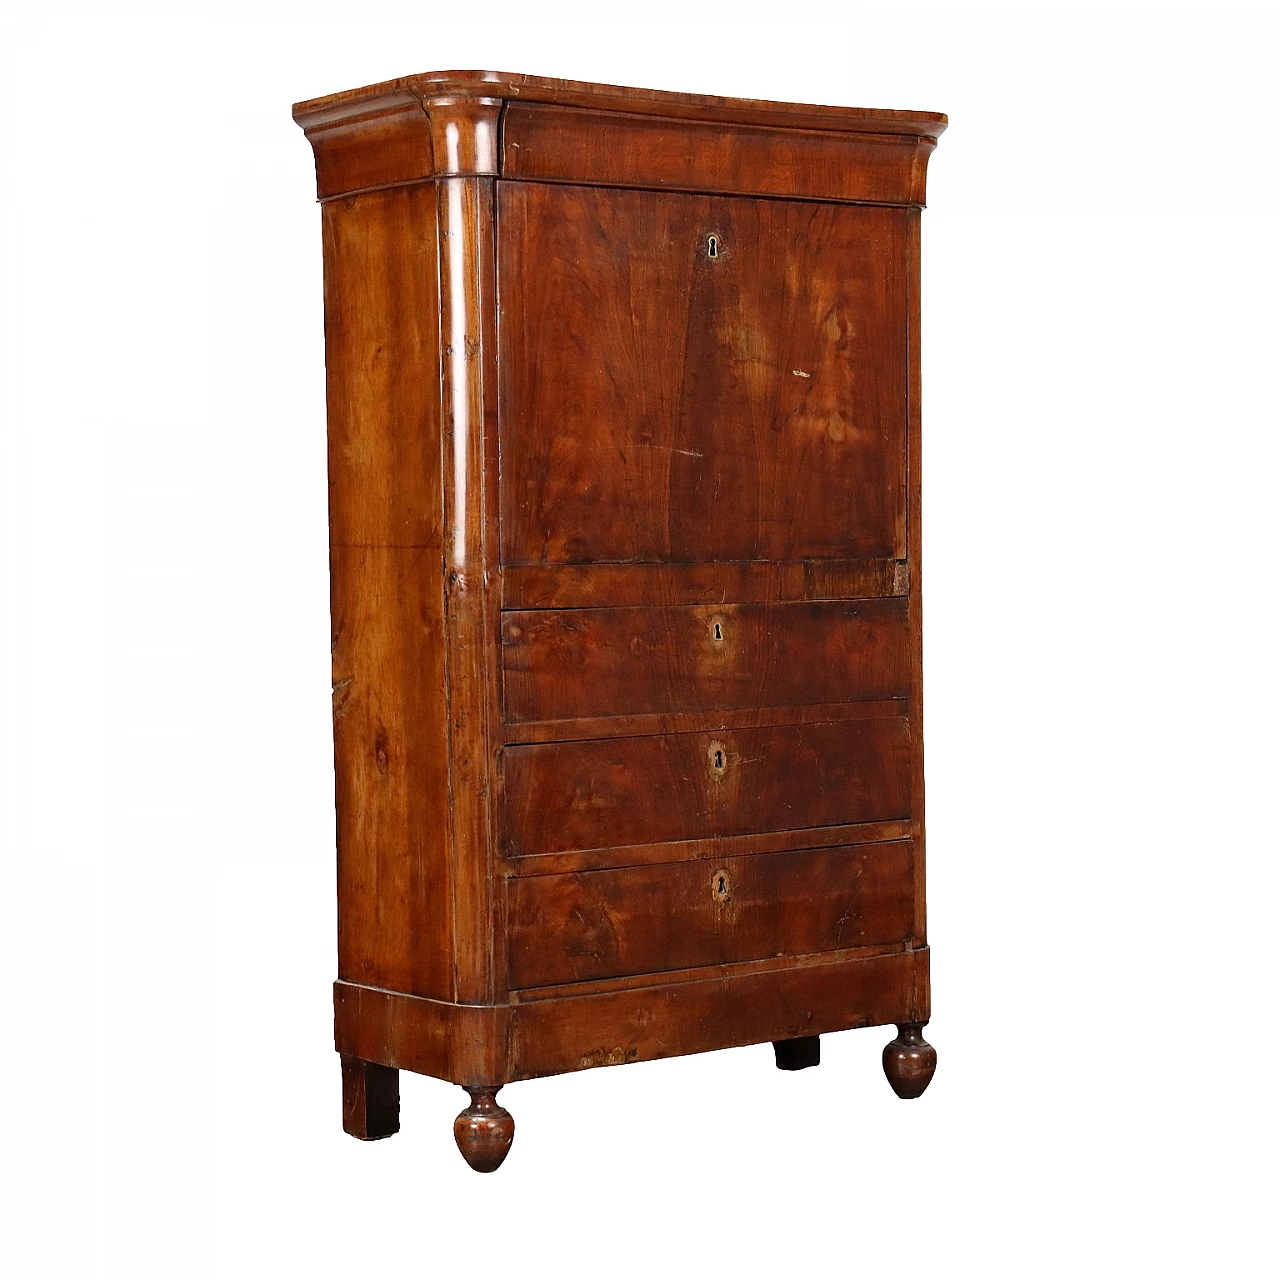 Walnut secrétaire with drawers and flap door, 19th century 1